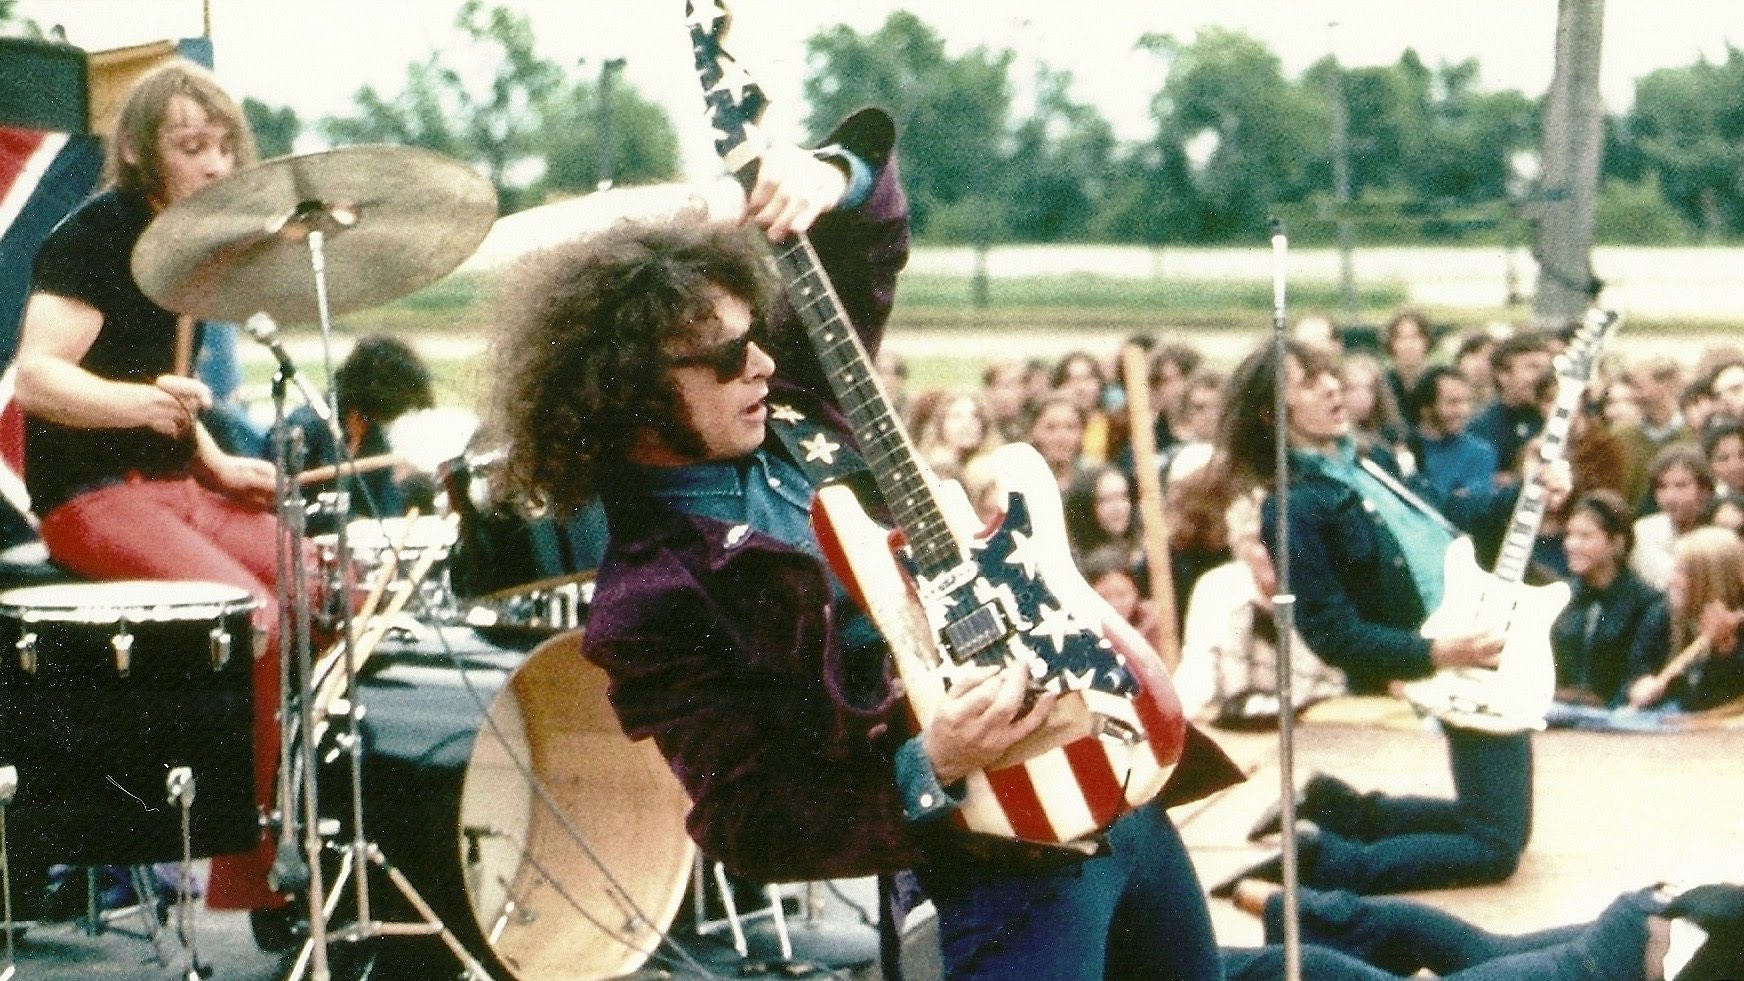 Wayne Kramer, Rock Legend And Failed Outlaw, Assembles A Supergroup In The  Rearview : NPR